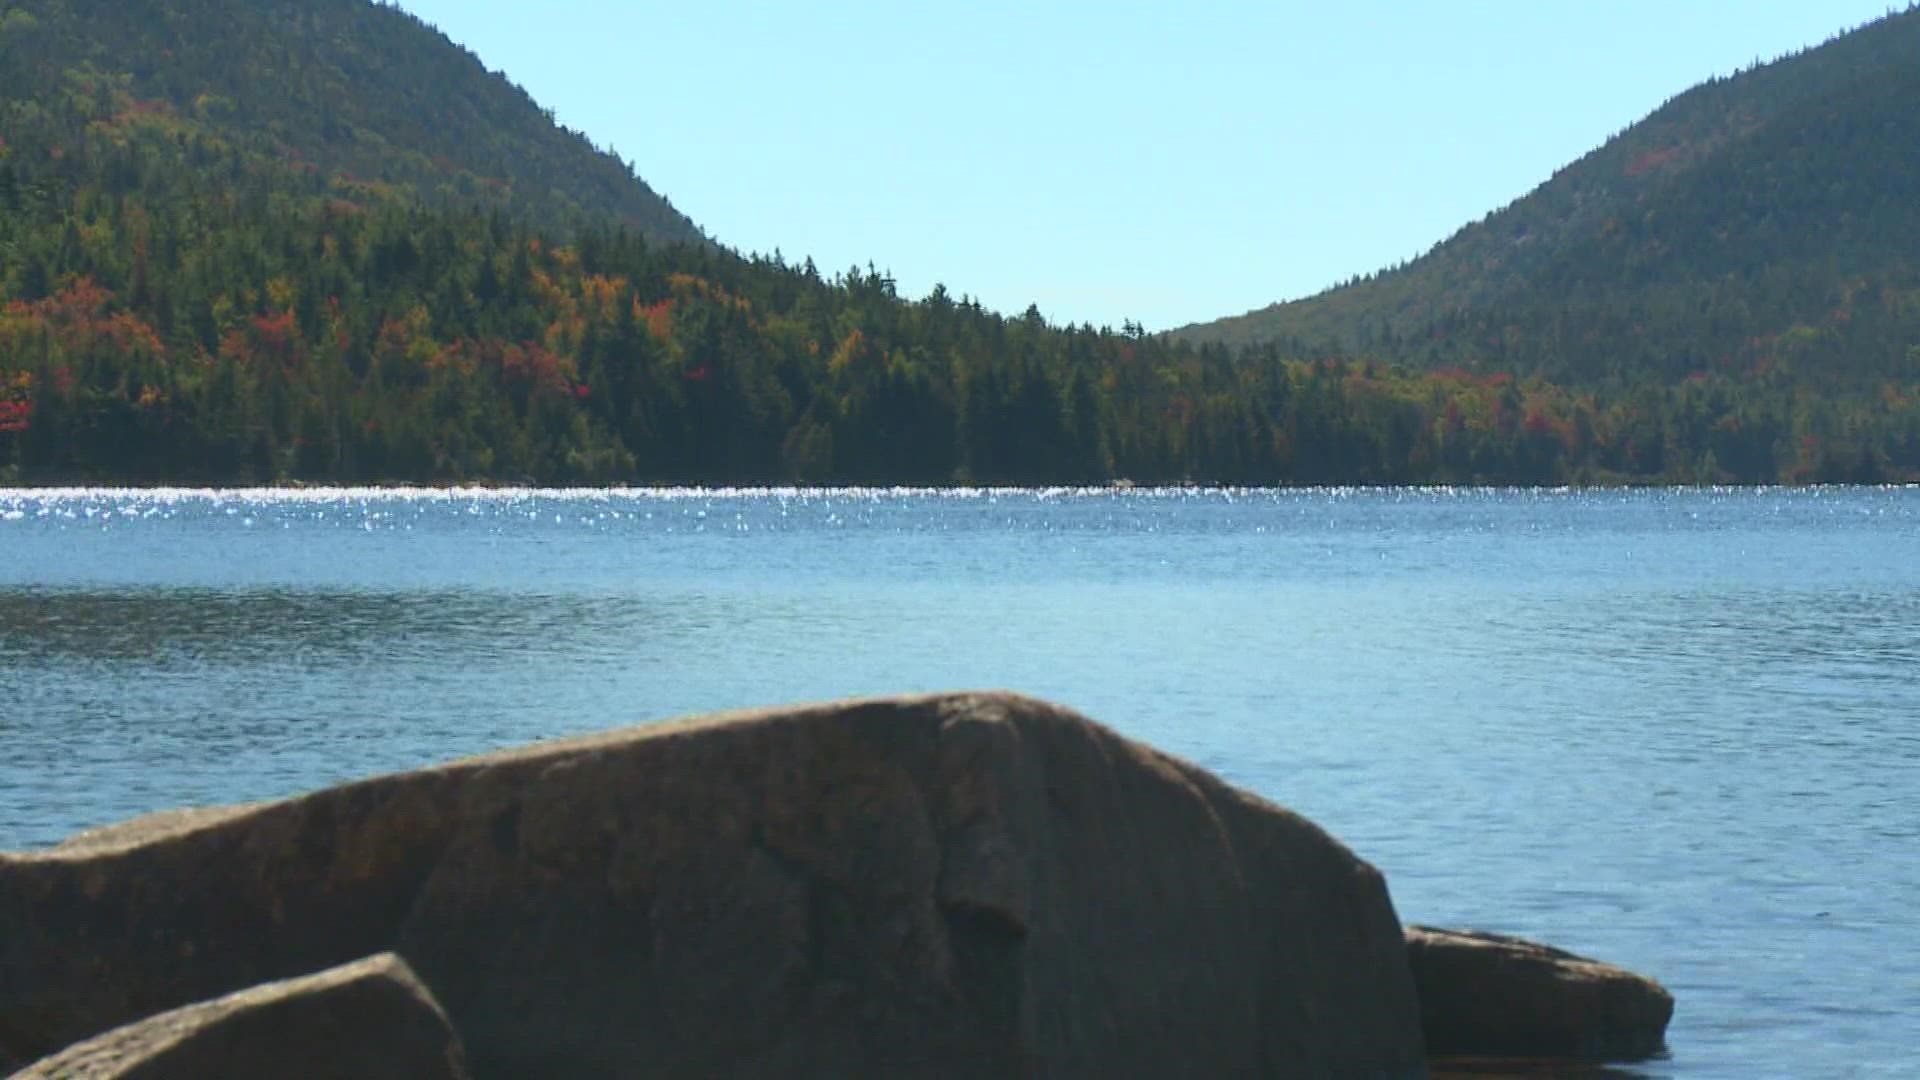 The July EPA deadline asked Maine to submit a plan to reduce air pollution at Acadia National Park.